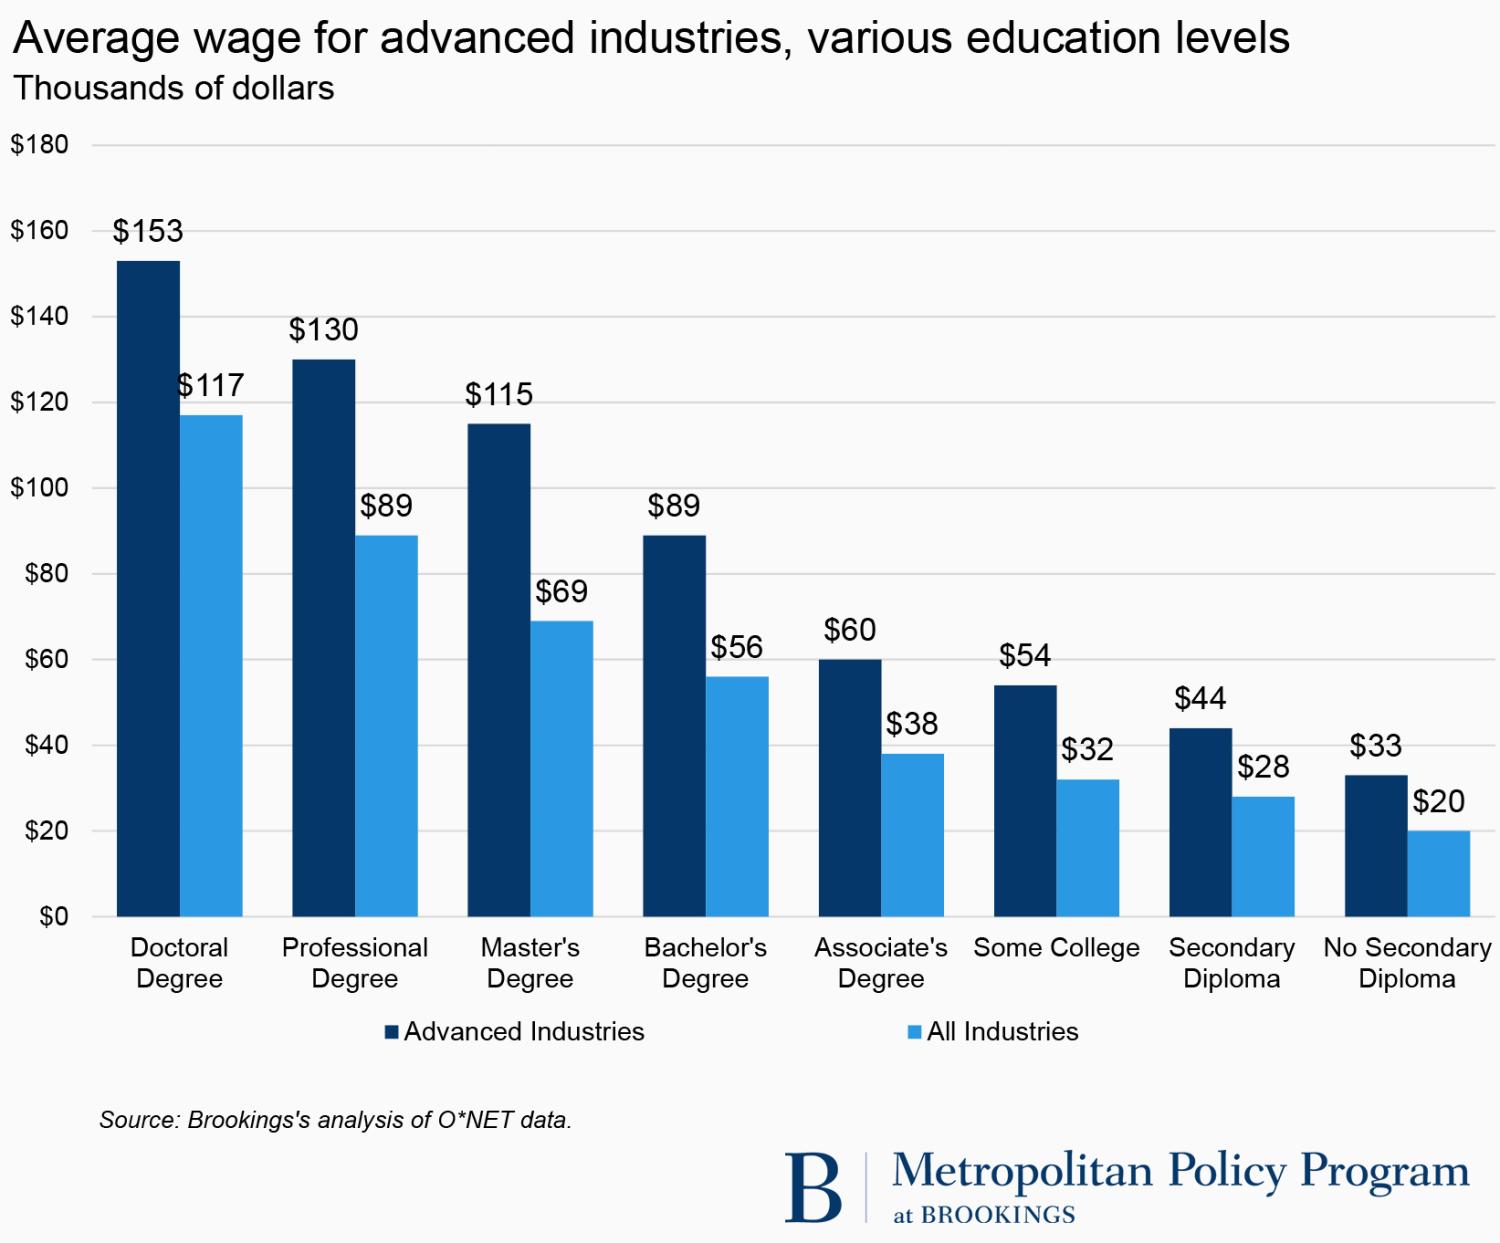 Average wage for advanced industries, various education levels